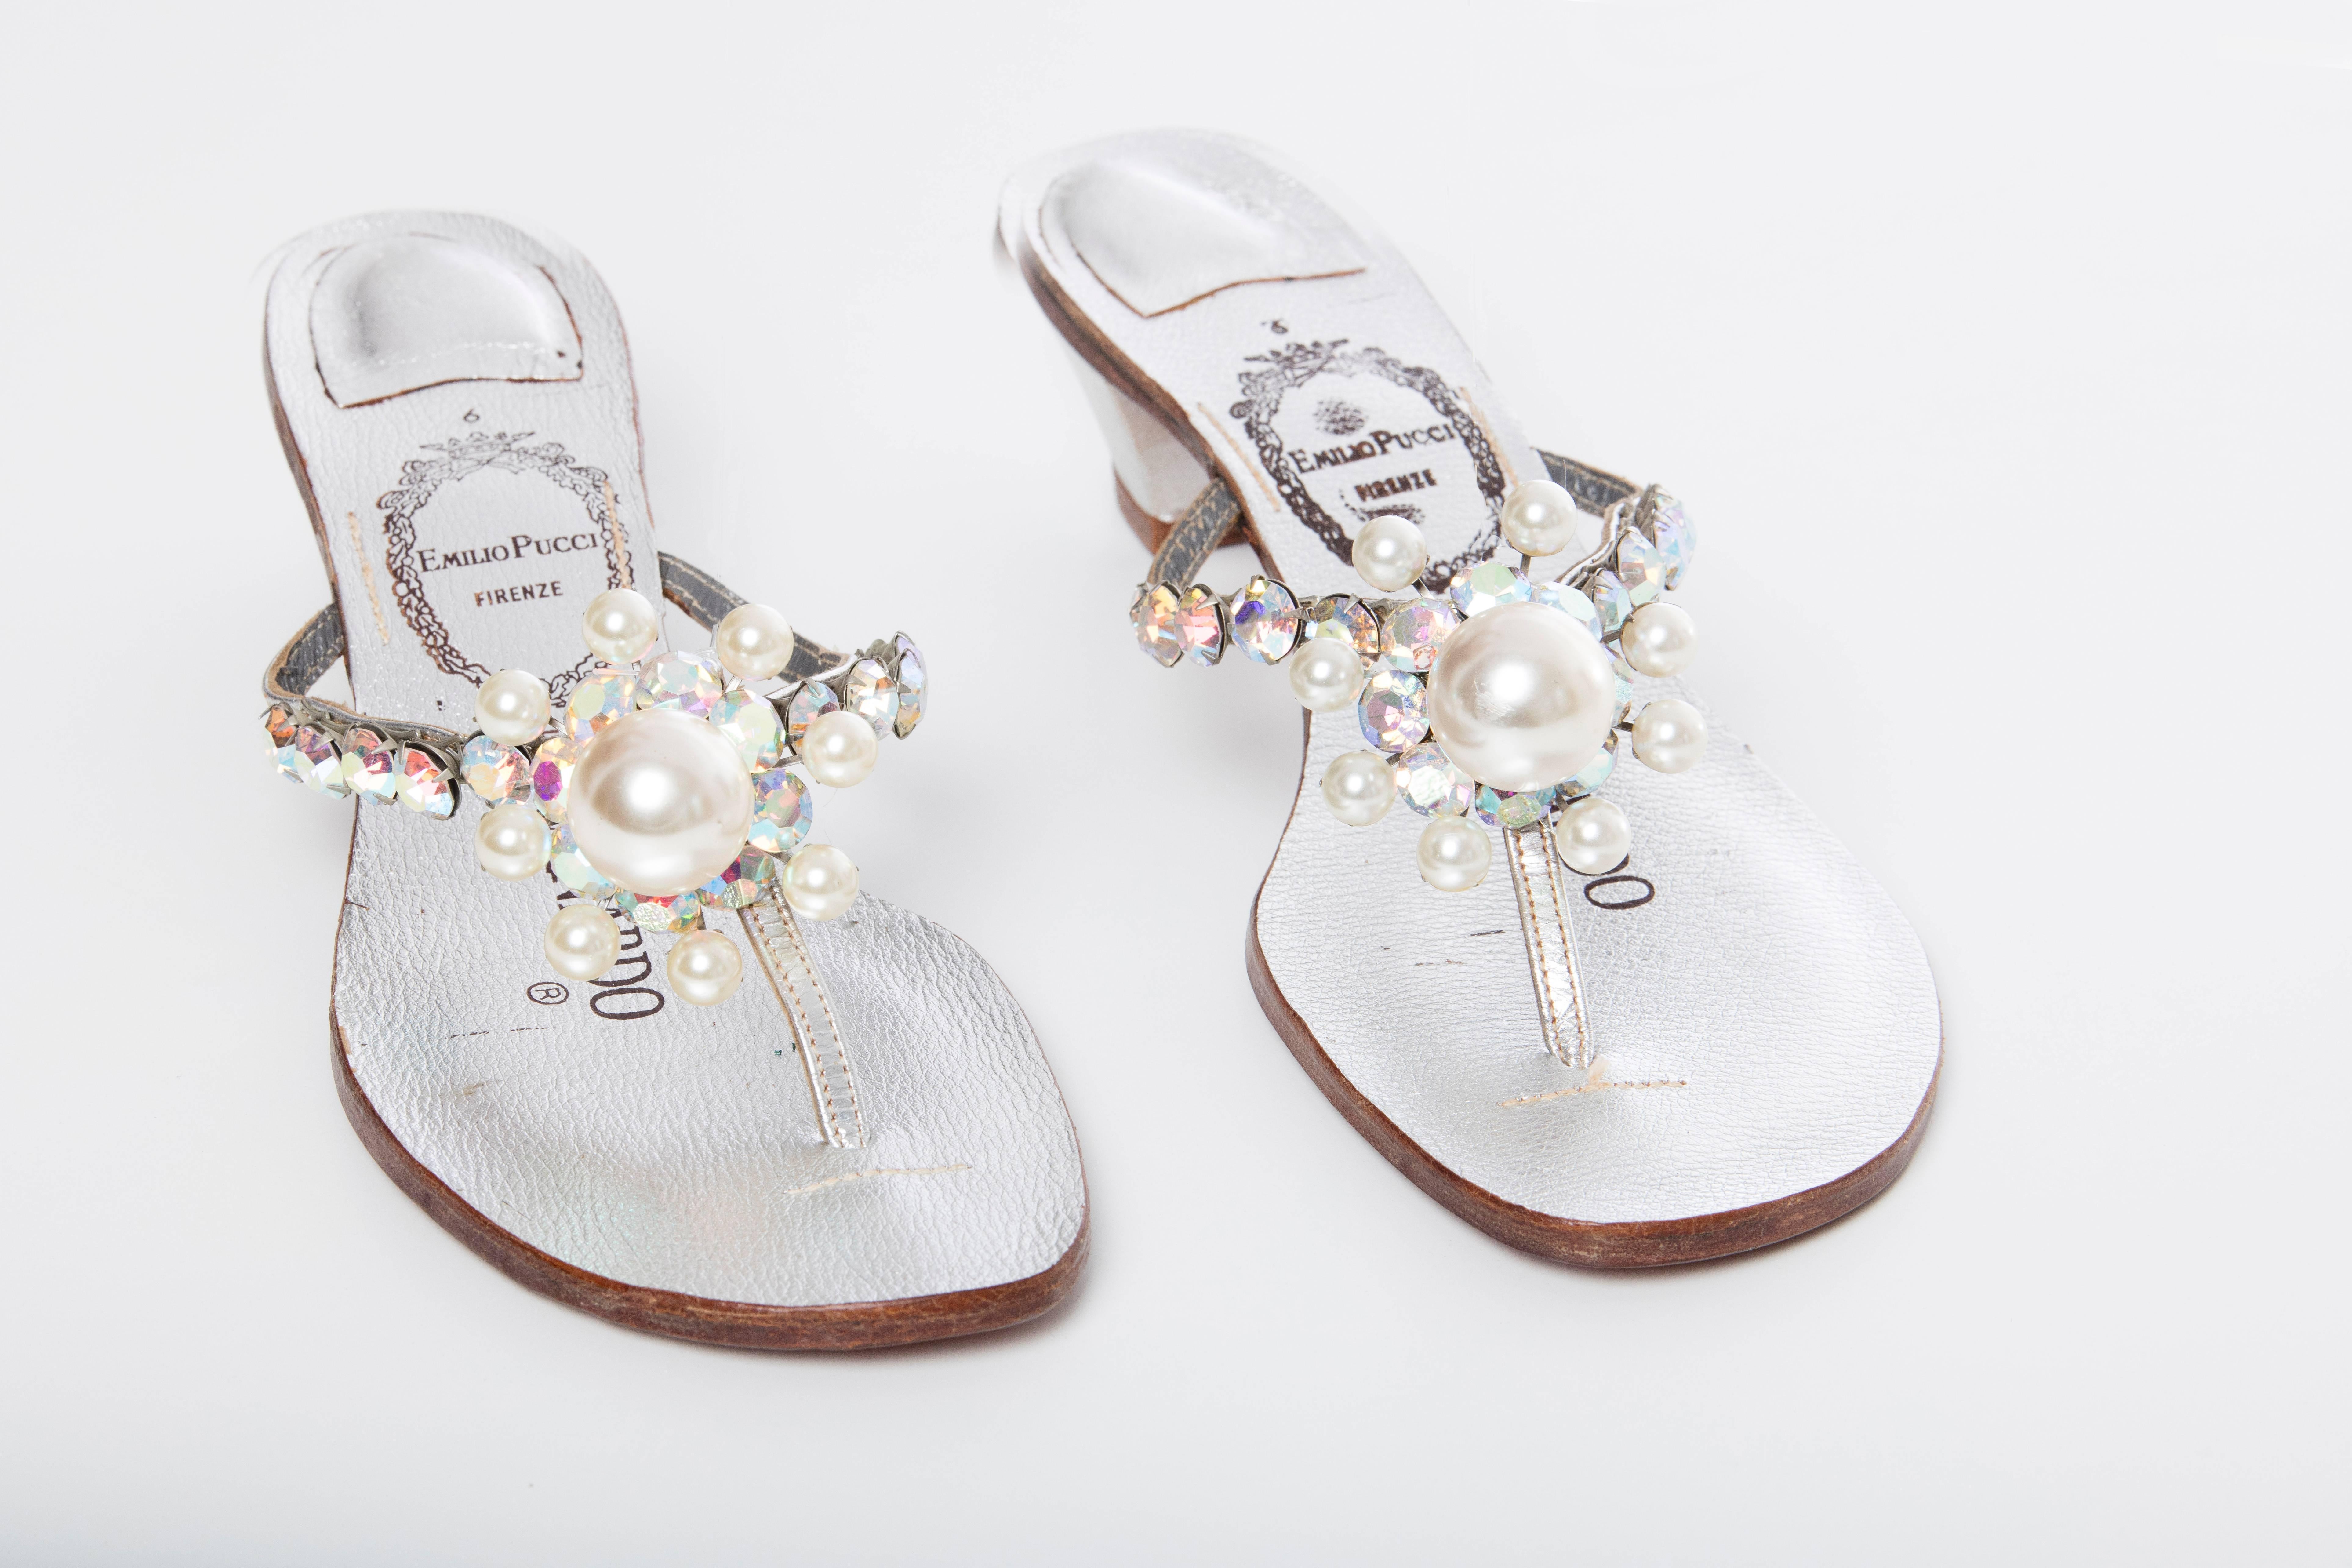 Emilio Pucci for Bernardo, circa 1960's Swarovski Aurora Borealis crystals and pearls silver leather sandals.

Labeled a US. 9 but fits US. 8.5

Length: 10 1/4